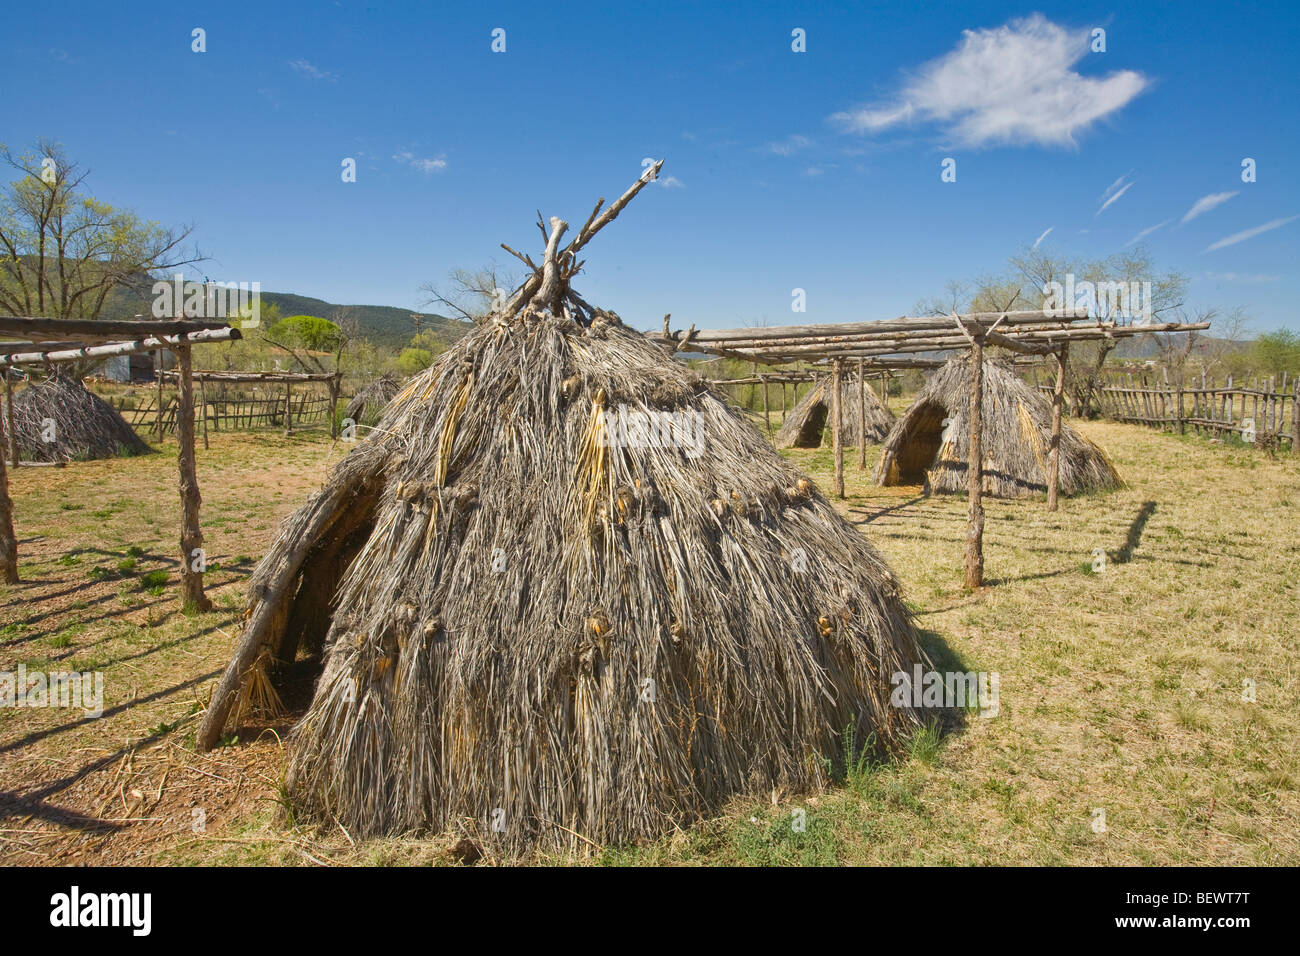 Apache traditional village outside Apache Cultural Center, White Mountain Apache Nation, Fort Apache Indian Reservation, Arizona Stock Photo